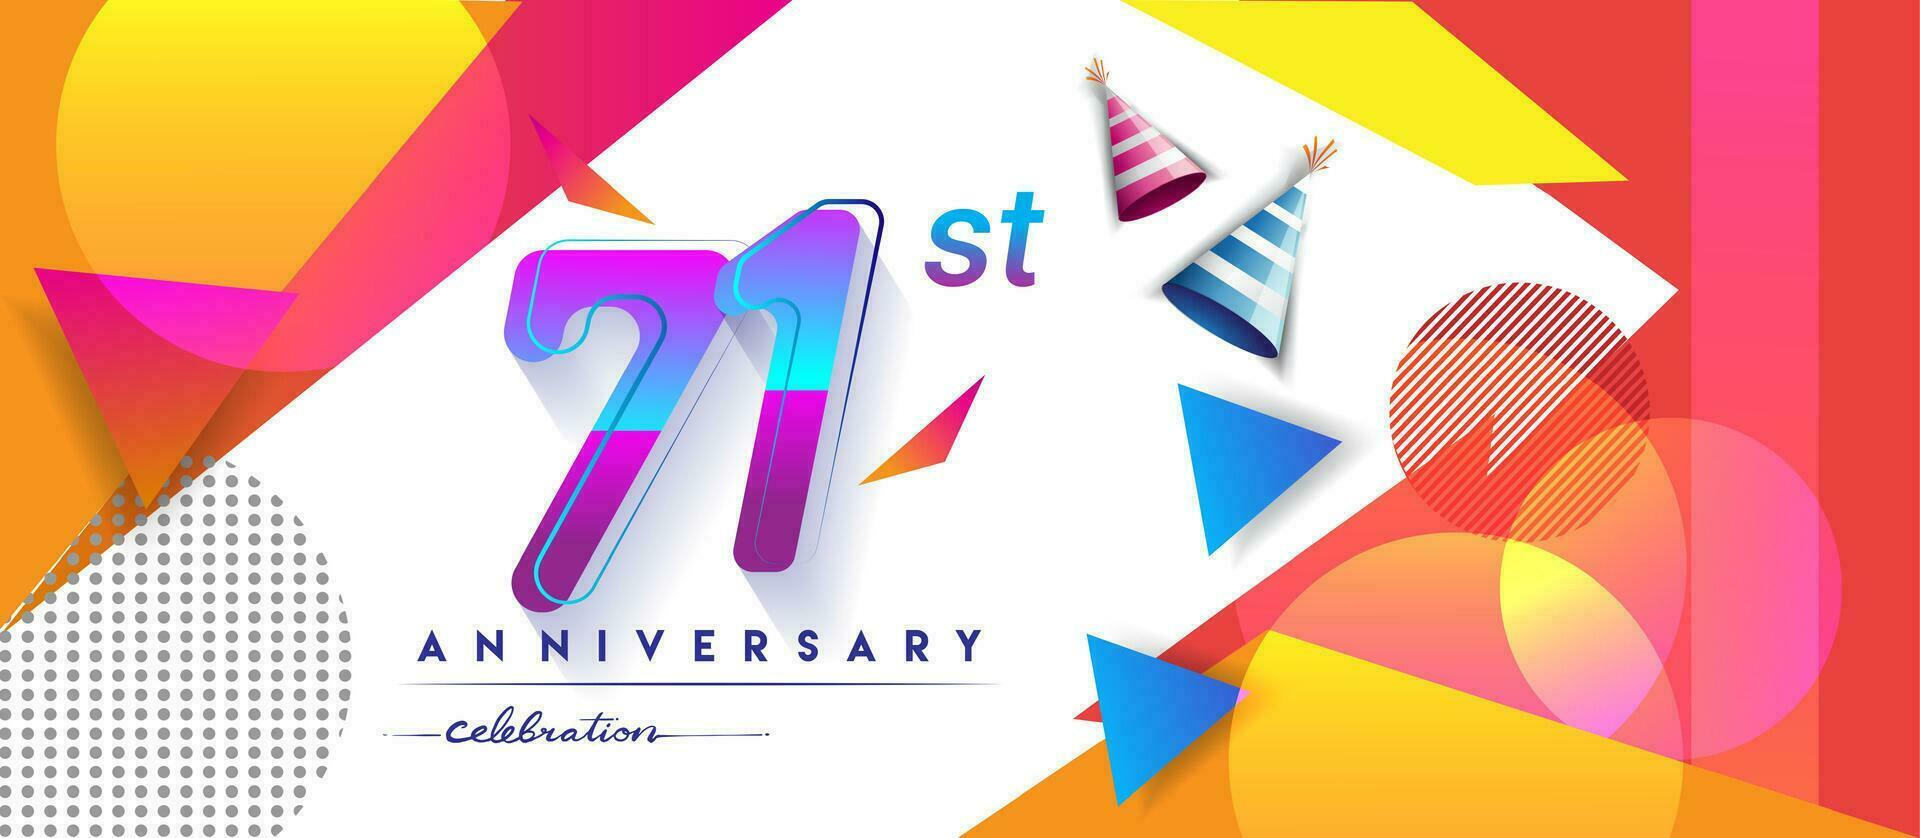 71st years anniversary logo, vector design birthday celebration with colorful geometric background and circles shape.